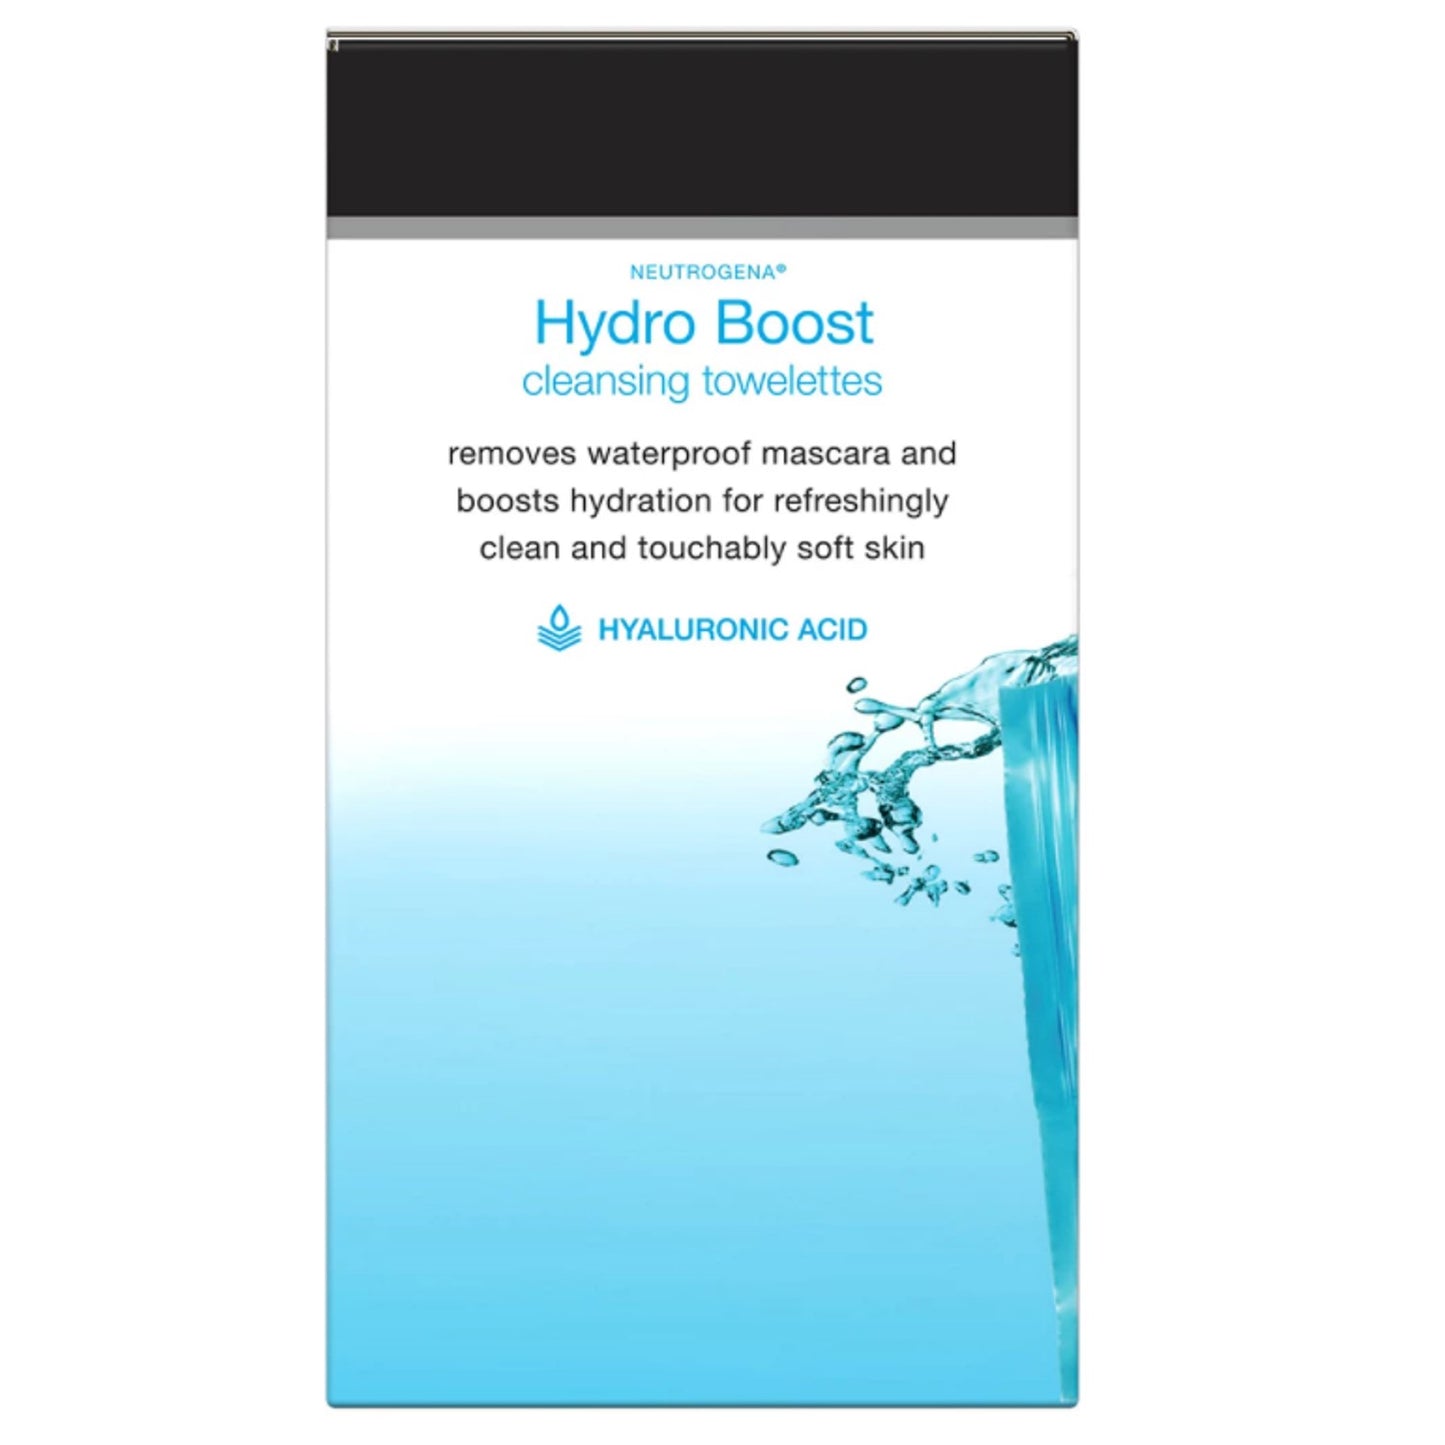 Neutrogena Hydro Boost Cleanser Facial Wipes 25 Count - 4 Pack